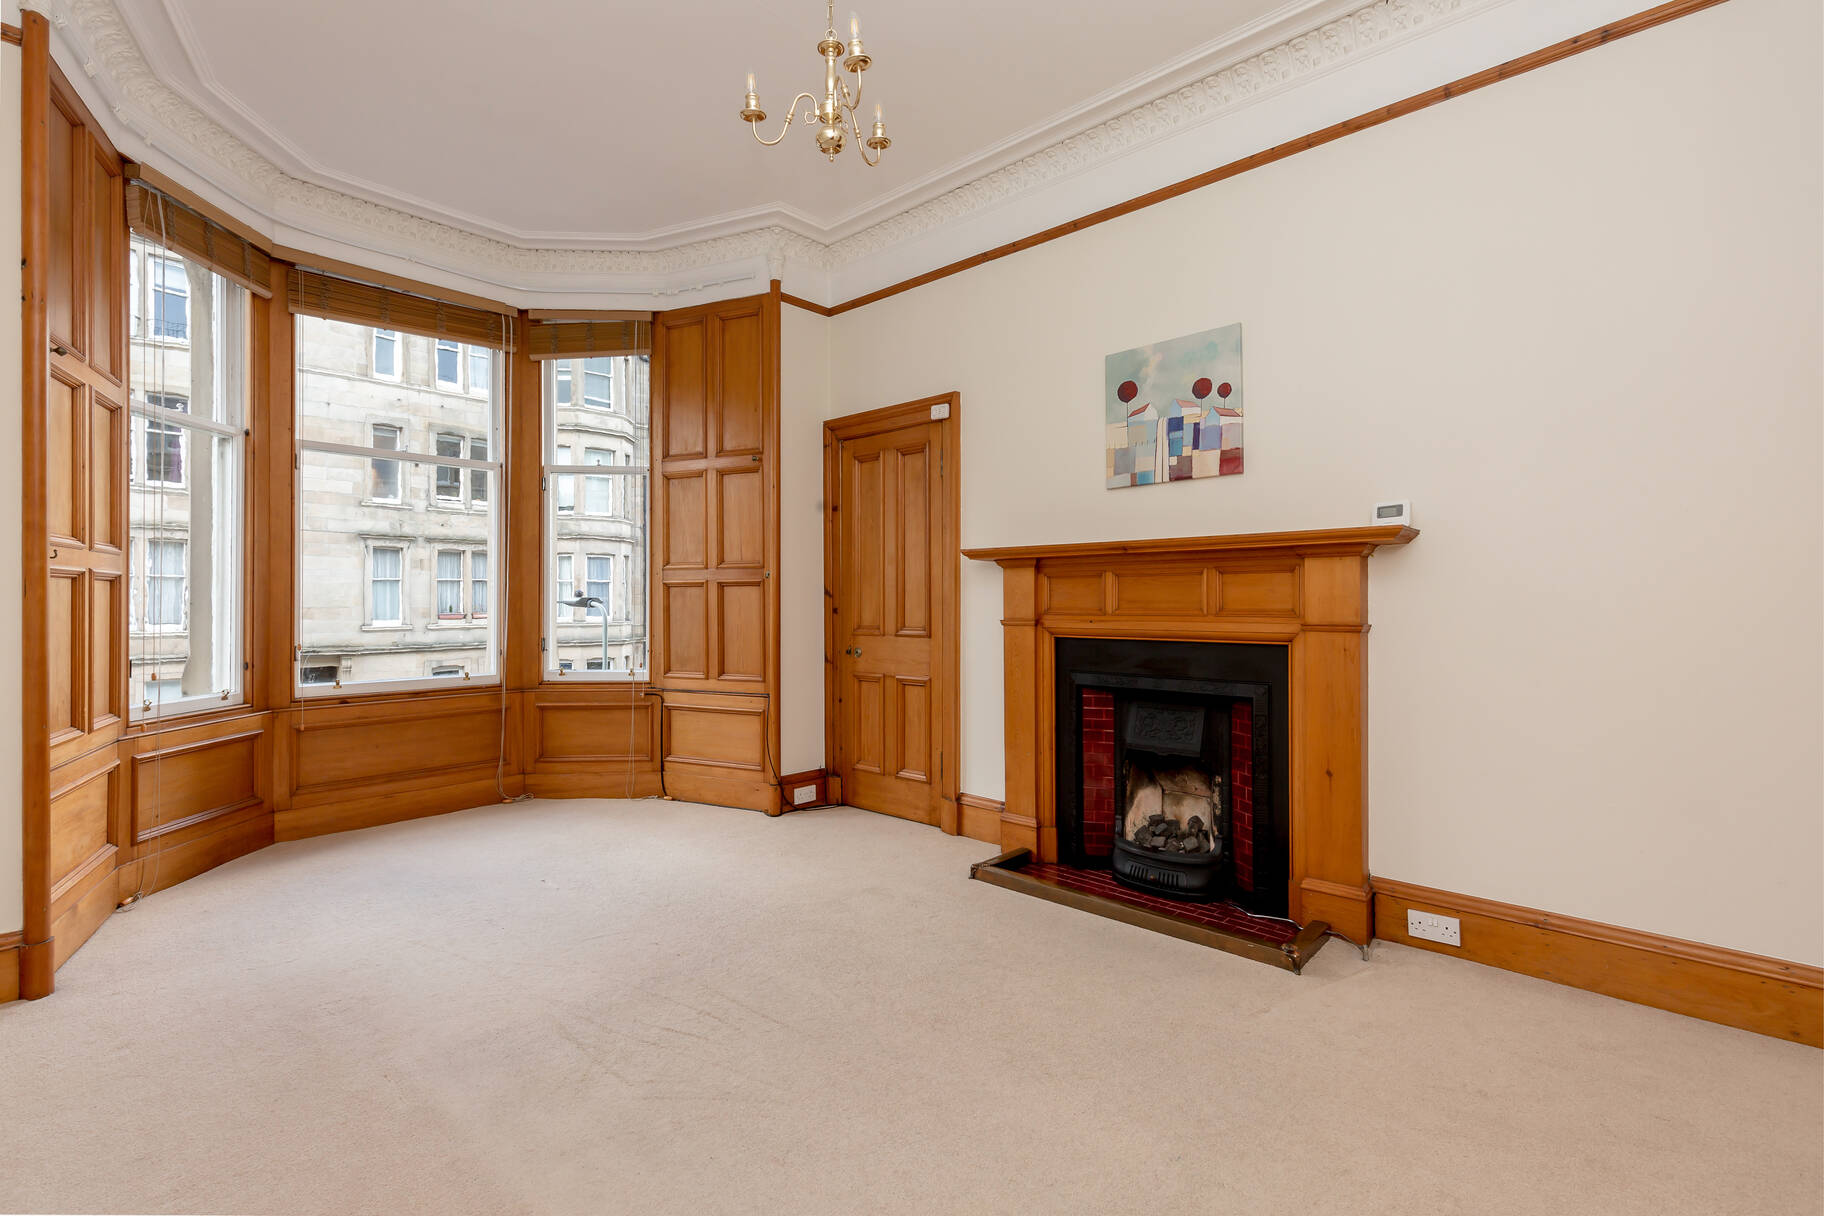 20/3 Comely Bank Street, Comely Bank, Edinburgh, EH4 1BD